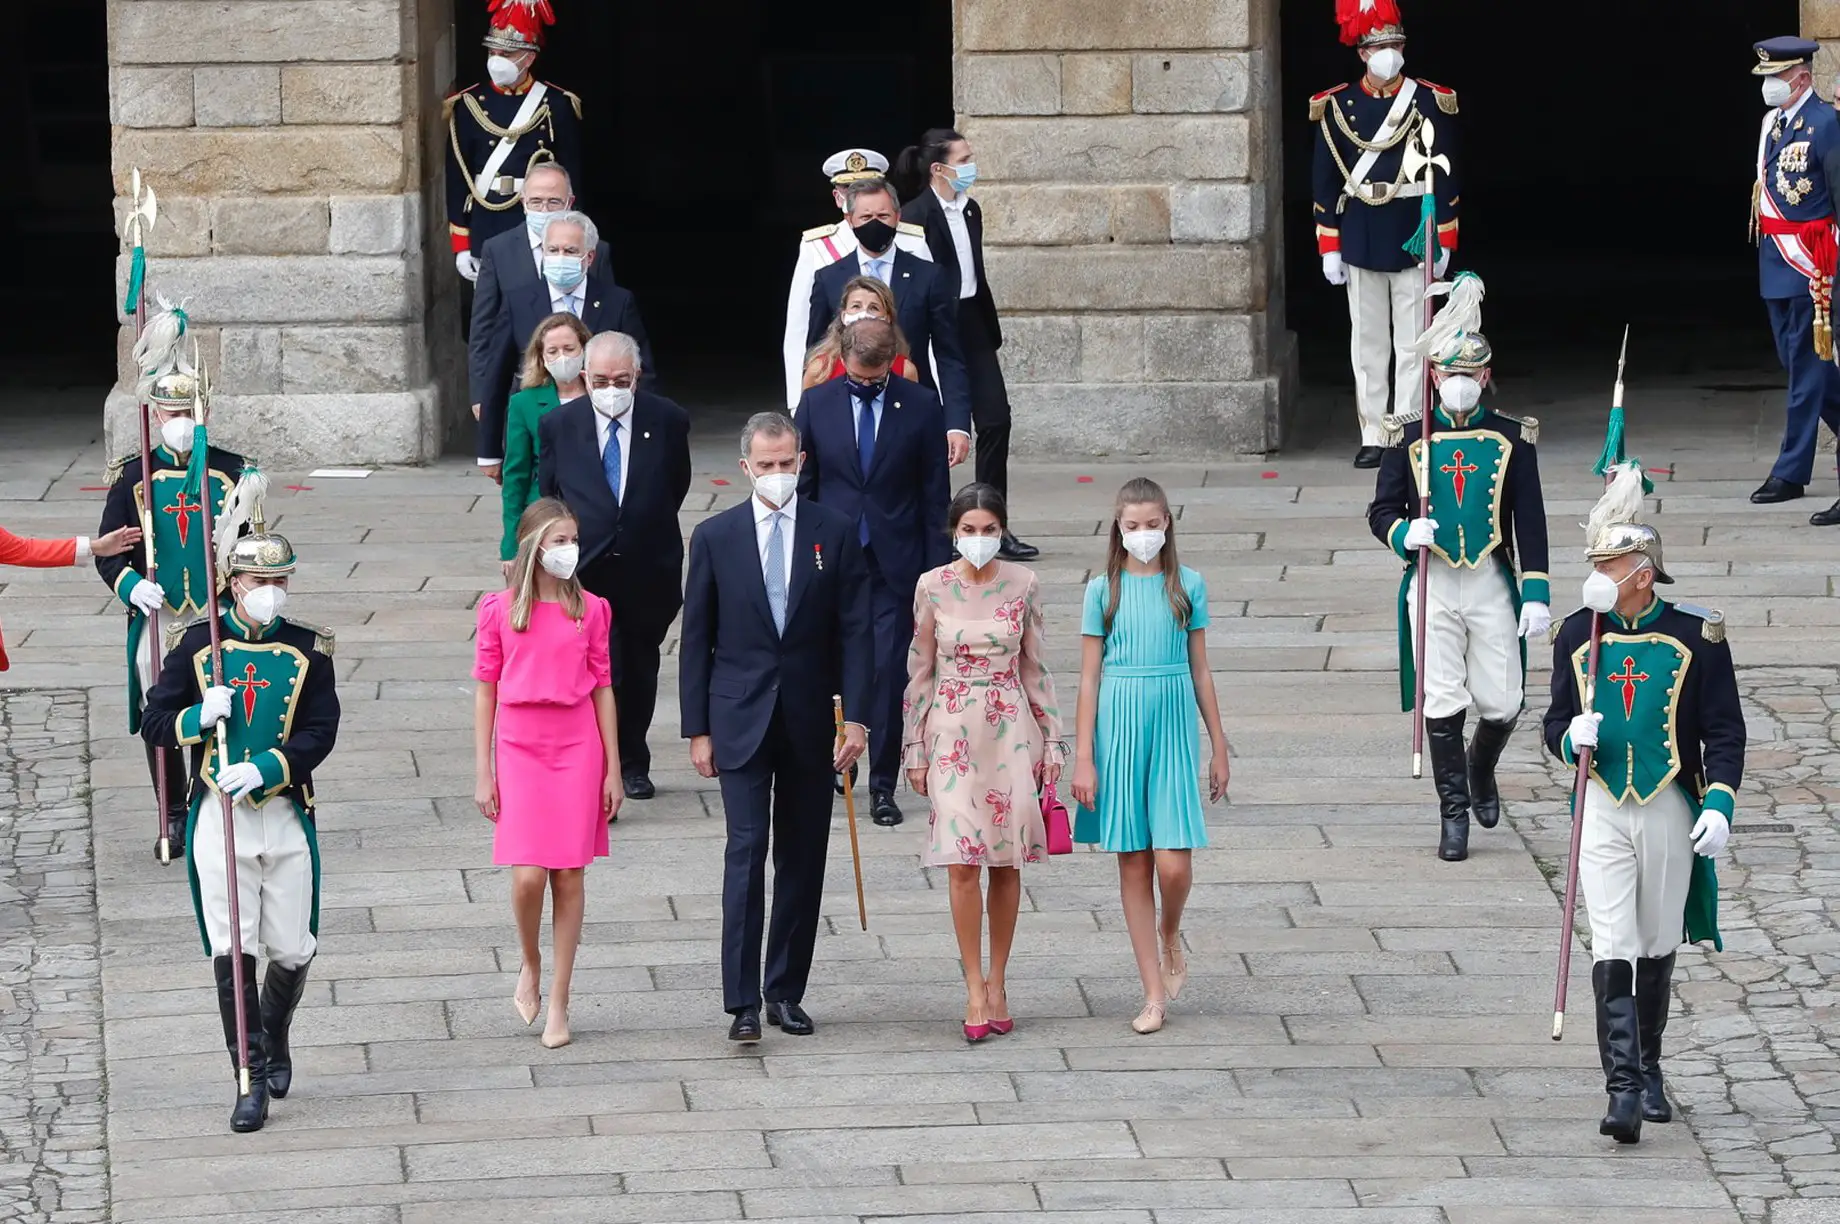 Spanish Royal Family today attended the National Offering to the Apostle Santiago, Patron Saint of Spain